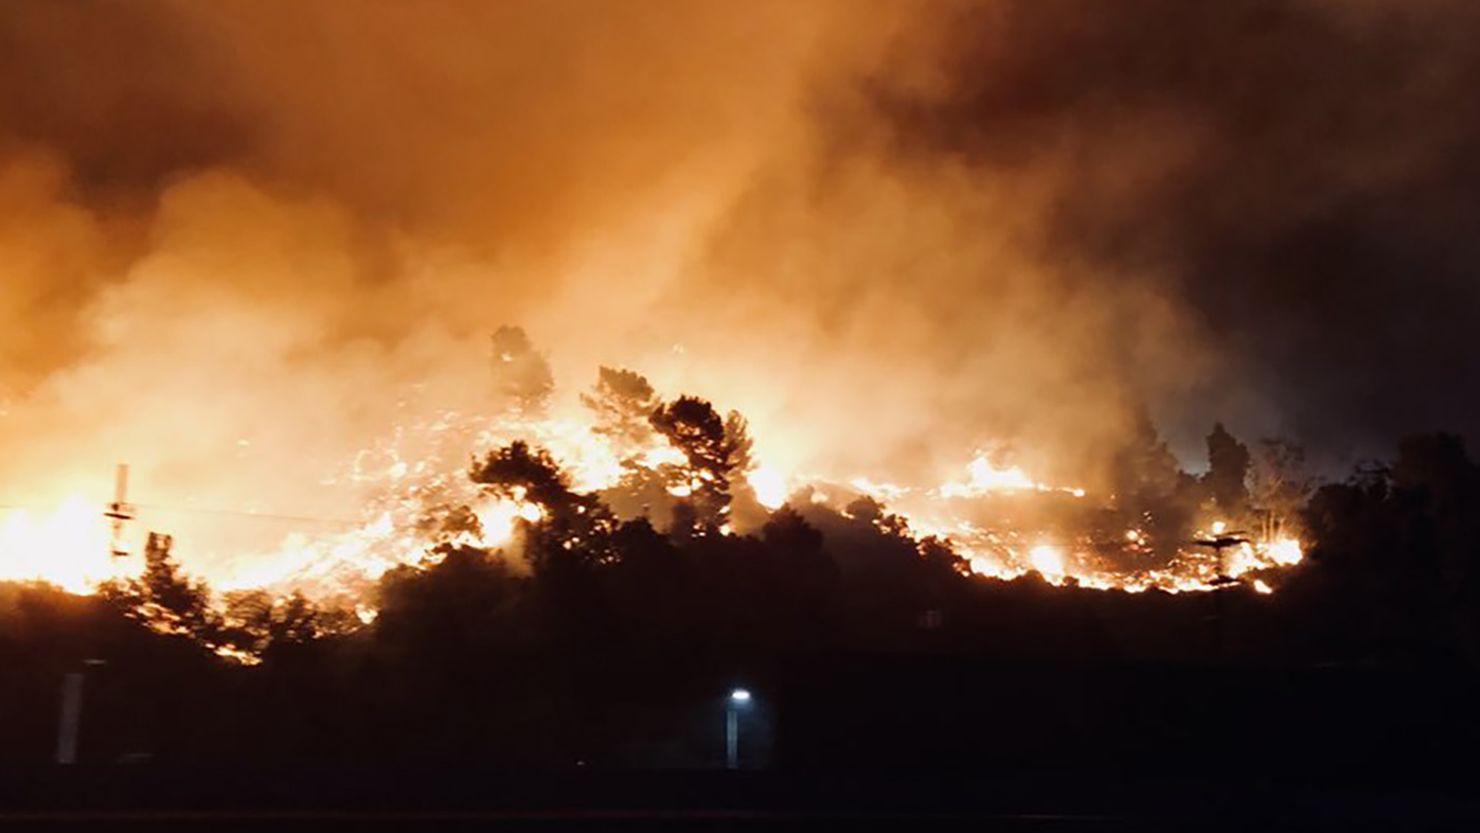 A wildfire burns near the Getty Center in Los Angeles.